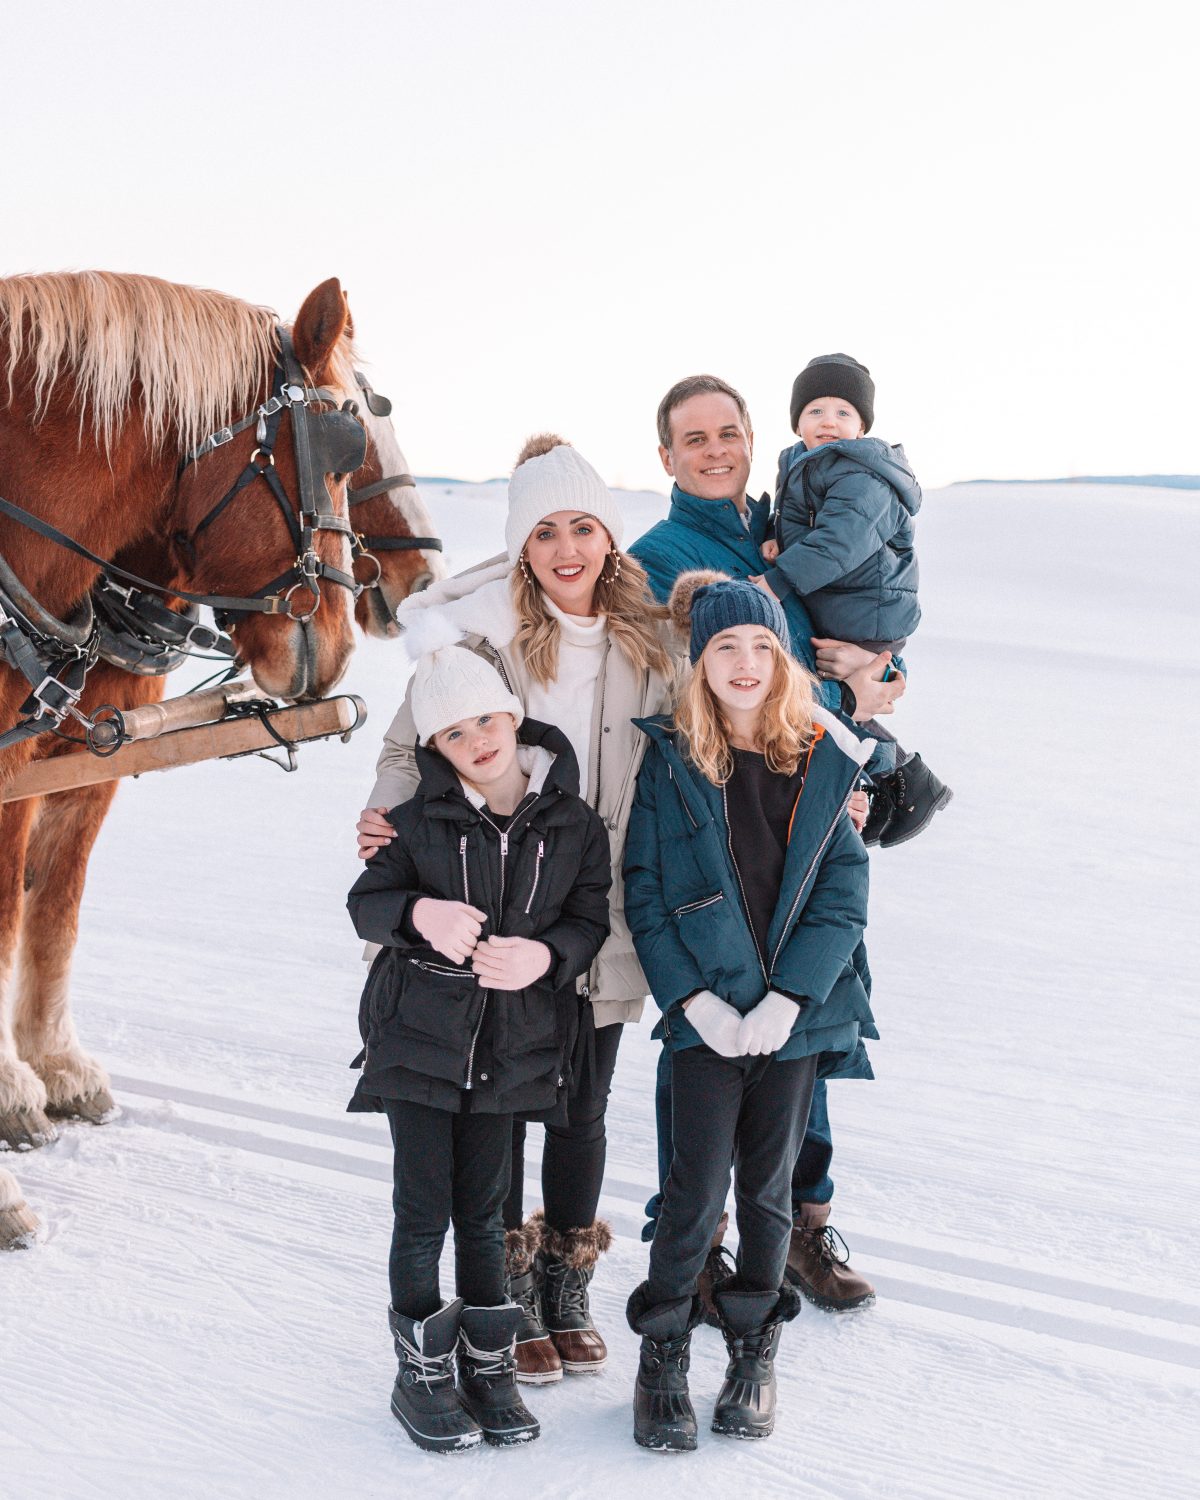 Steamboat Springs things to do - Haymaker Sleigh Ride dinner